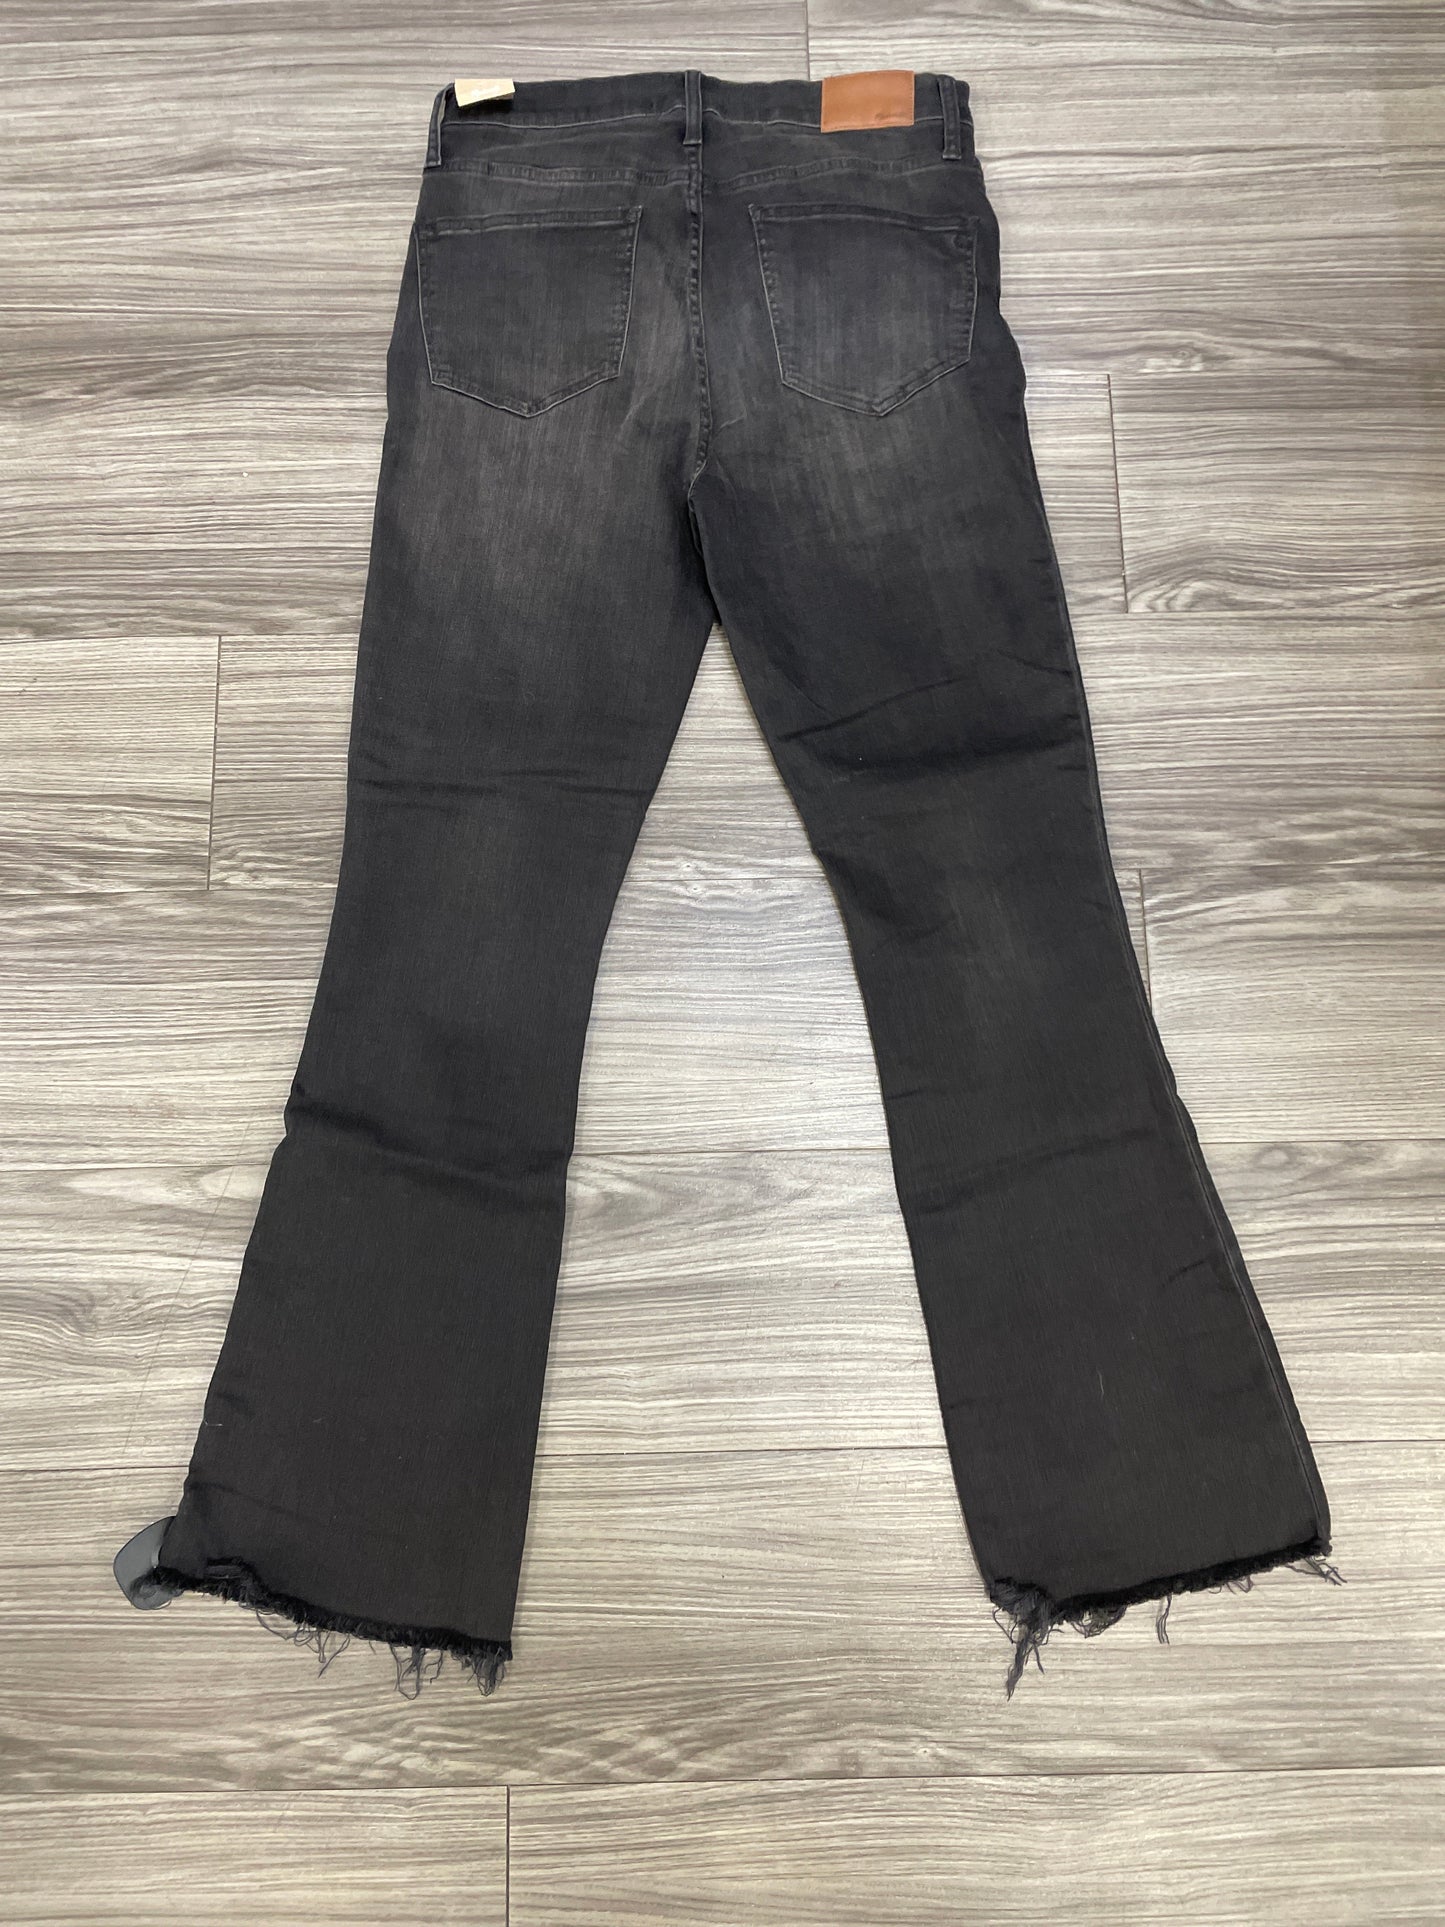 Black Jeans Boot Cut Madewell, Size 8